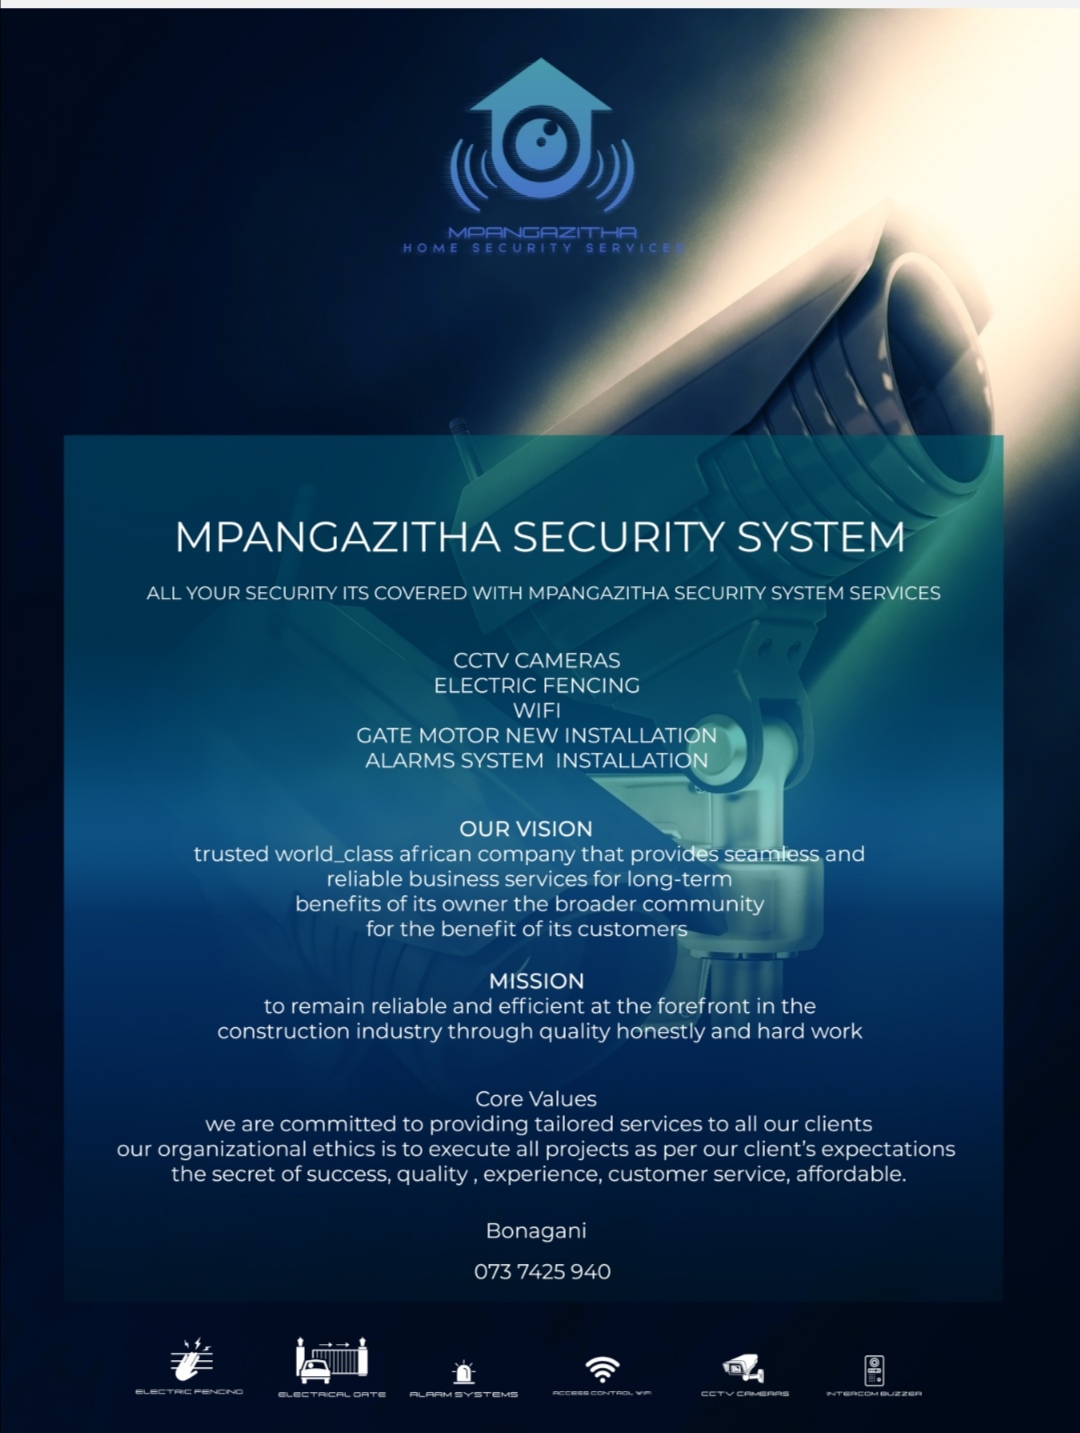 Mpangazitha security system  all your security its covered with Mpangazitha security system services  cctv cameras  Electric fencing  wifi  Gate motor new installation and service  Alarms system new installation and service  our vision   trusted world_class african company that provides seamless and reliable business services for long-term benefits of its owner the broader community for the benefit of its customers   Mission   to remain reliable and efficient at the forefront in the construction